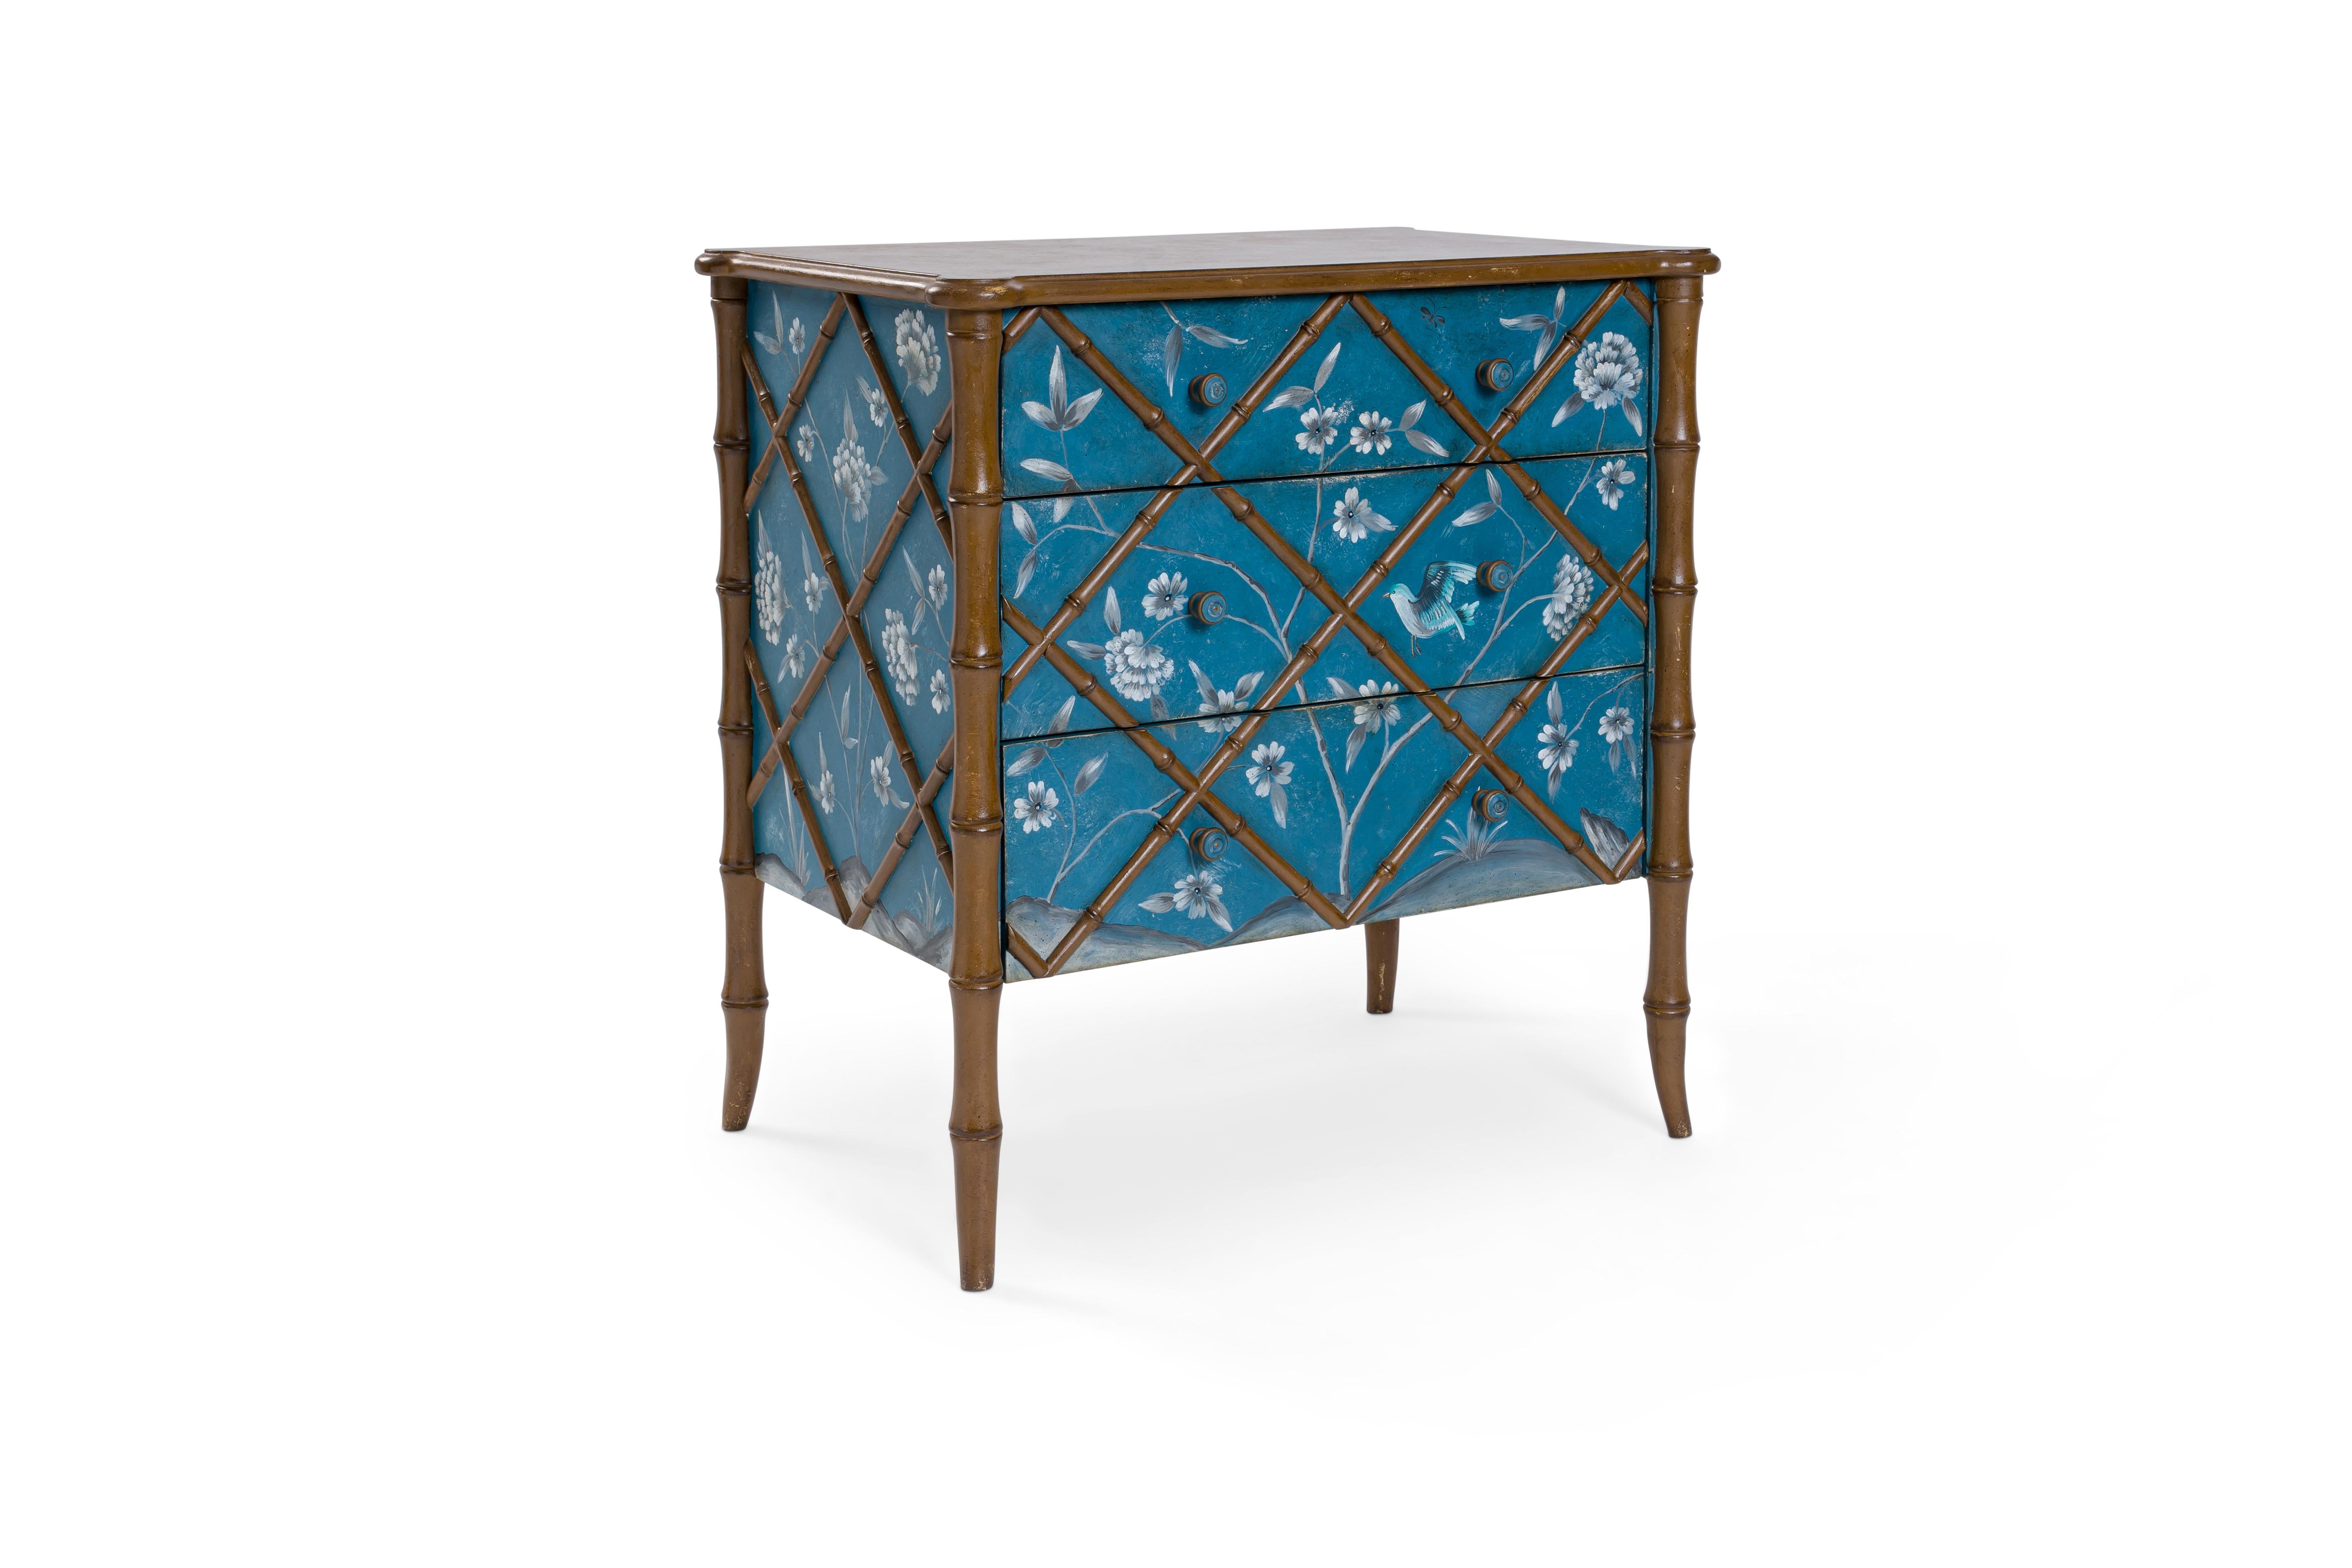 From our hand painted Furniture Collection, we are pleased to introduce you to our Blue Petrol Fiesole Chest. 
This beautiful creation is the perfect balance between the old-world of Venetian hand-painted Furniture and our signature touch of whimsy.